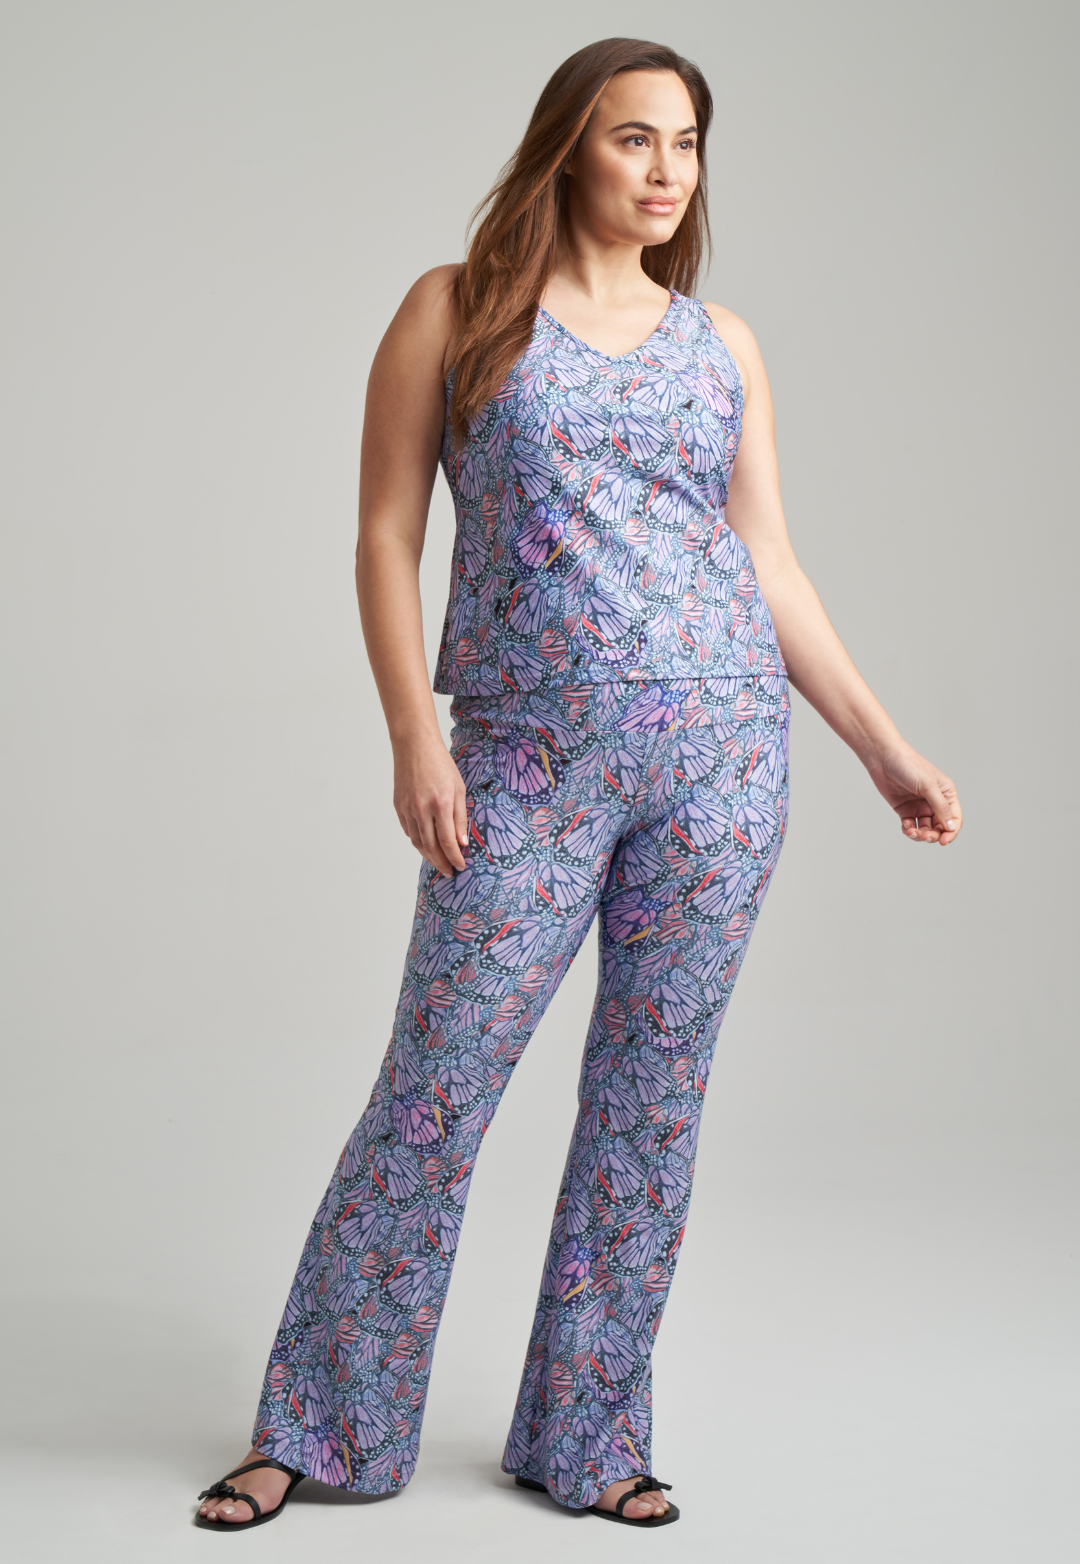 Woman wearing butterfly printed stretch knit tank top and butterfly printed stretch knit pant by Ala von Auersperg for spring summer 2021